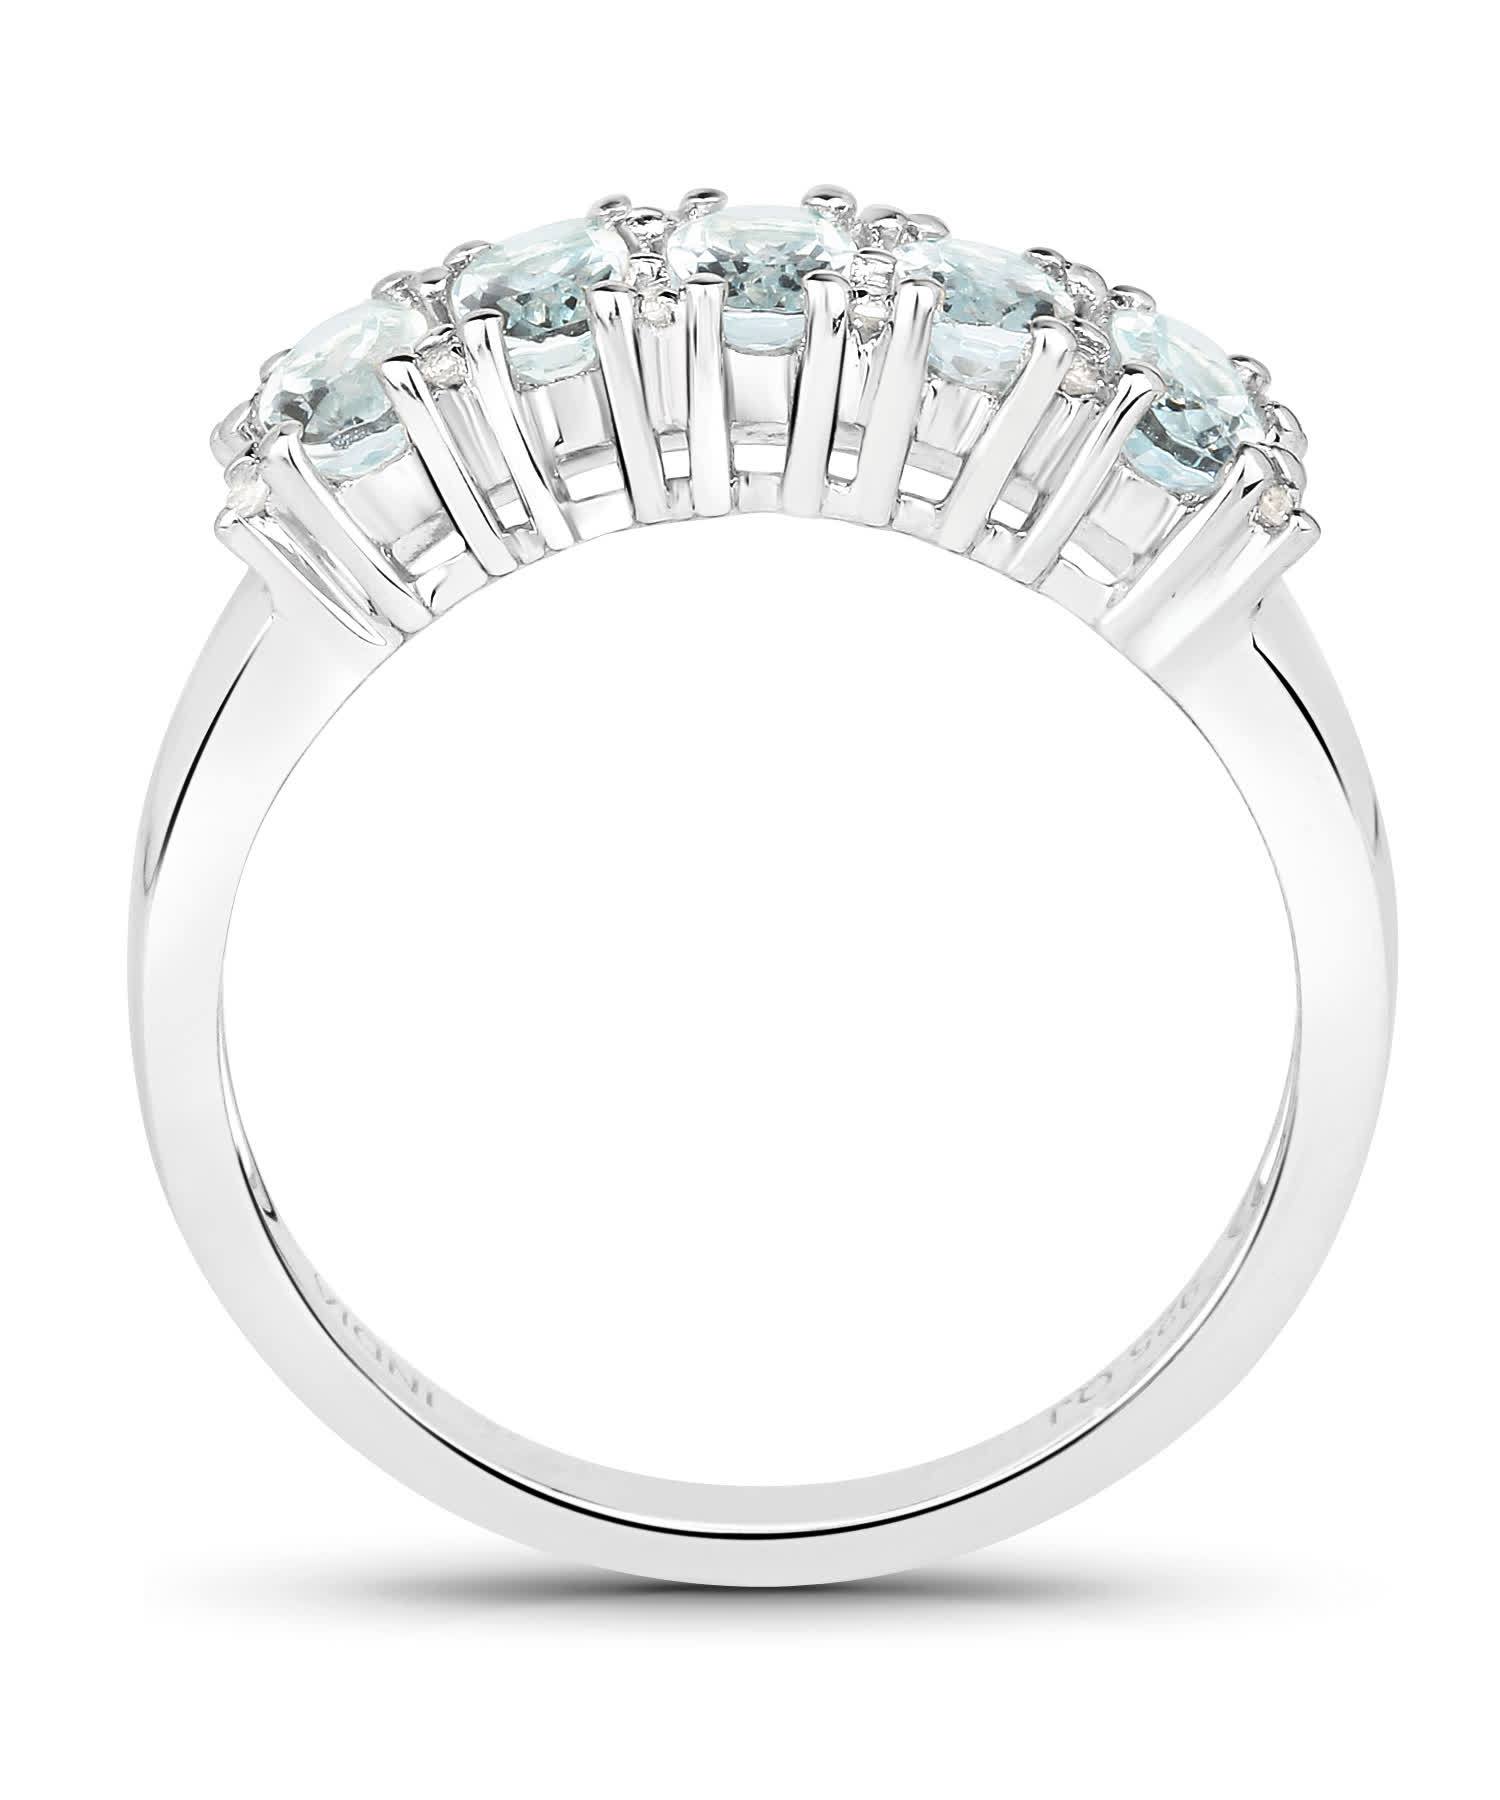 1.06ctw Natural Icy Sky Blue Aquamarine and Zircon Rhodium Plated 925 Sterling Silver Ring View 2